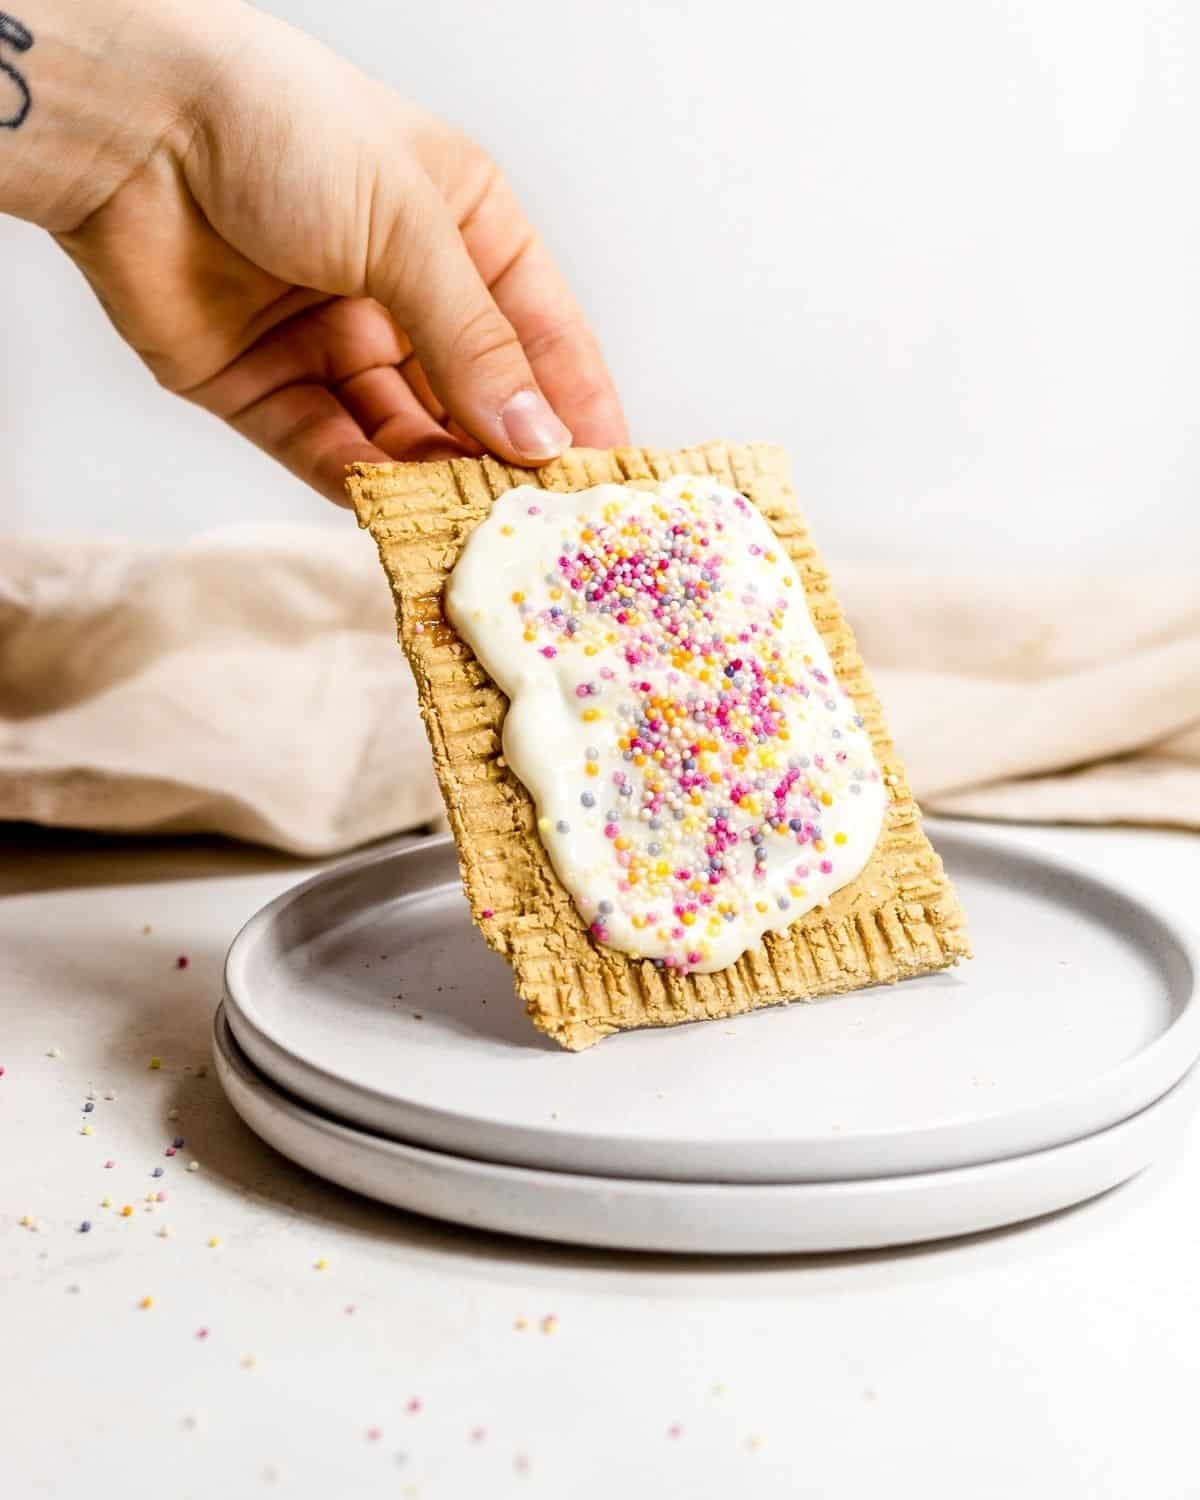 Someone holding a pop tart at an angle on a white plate.